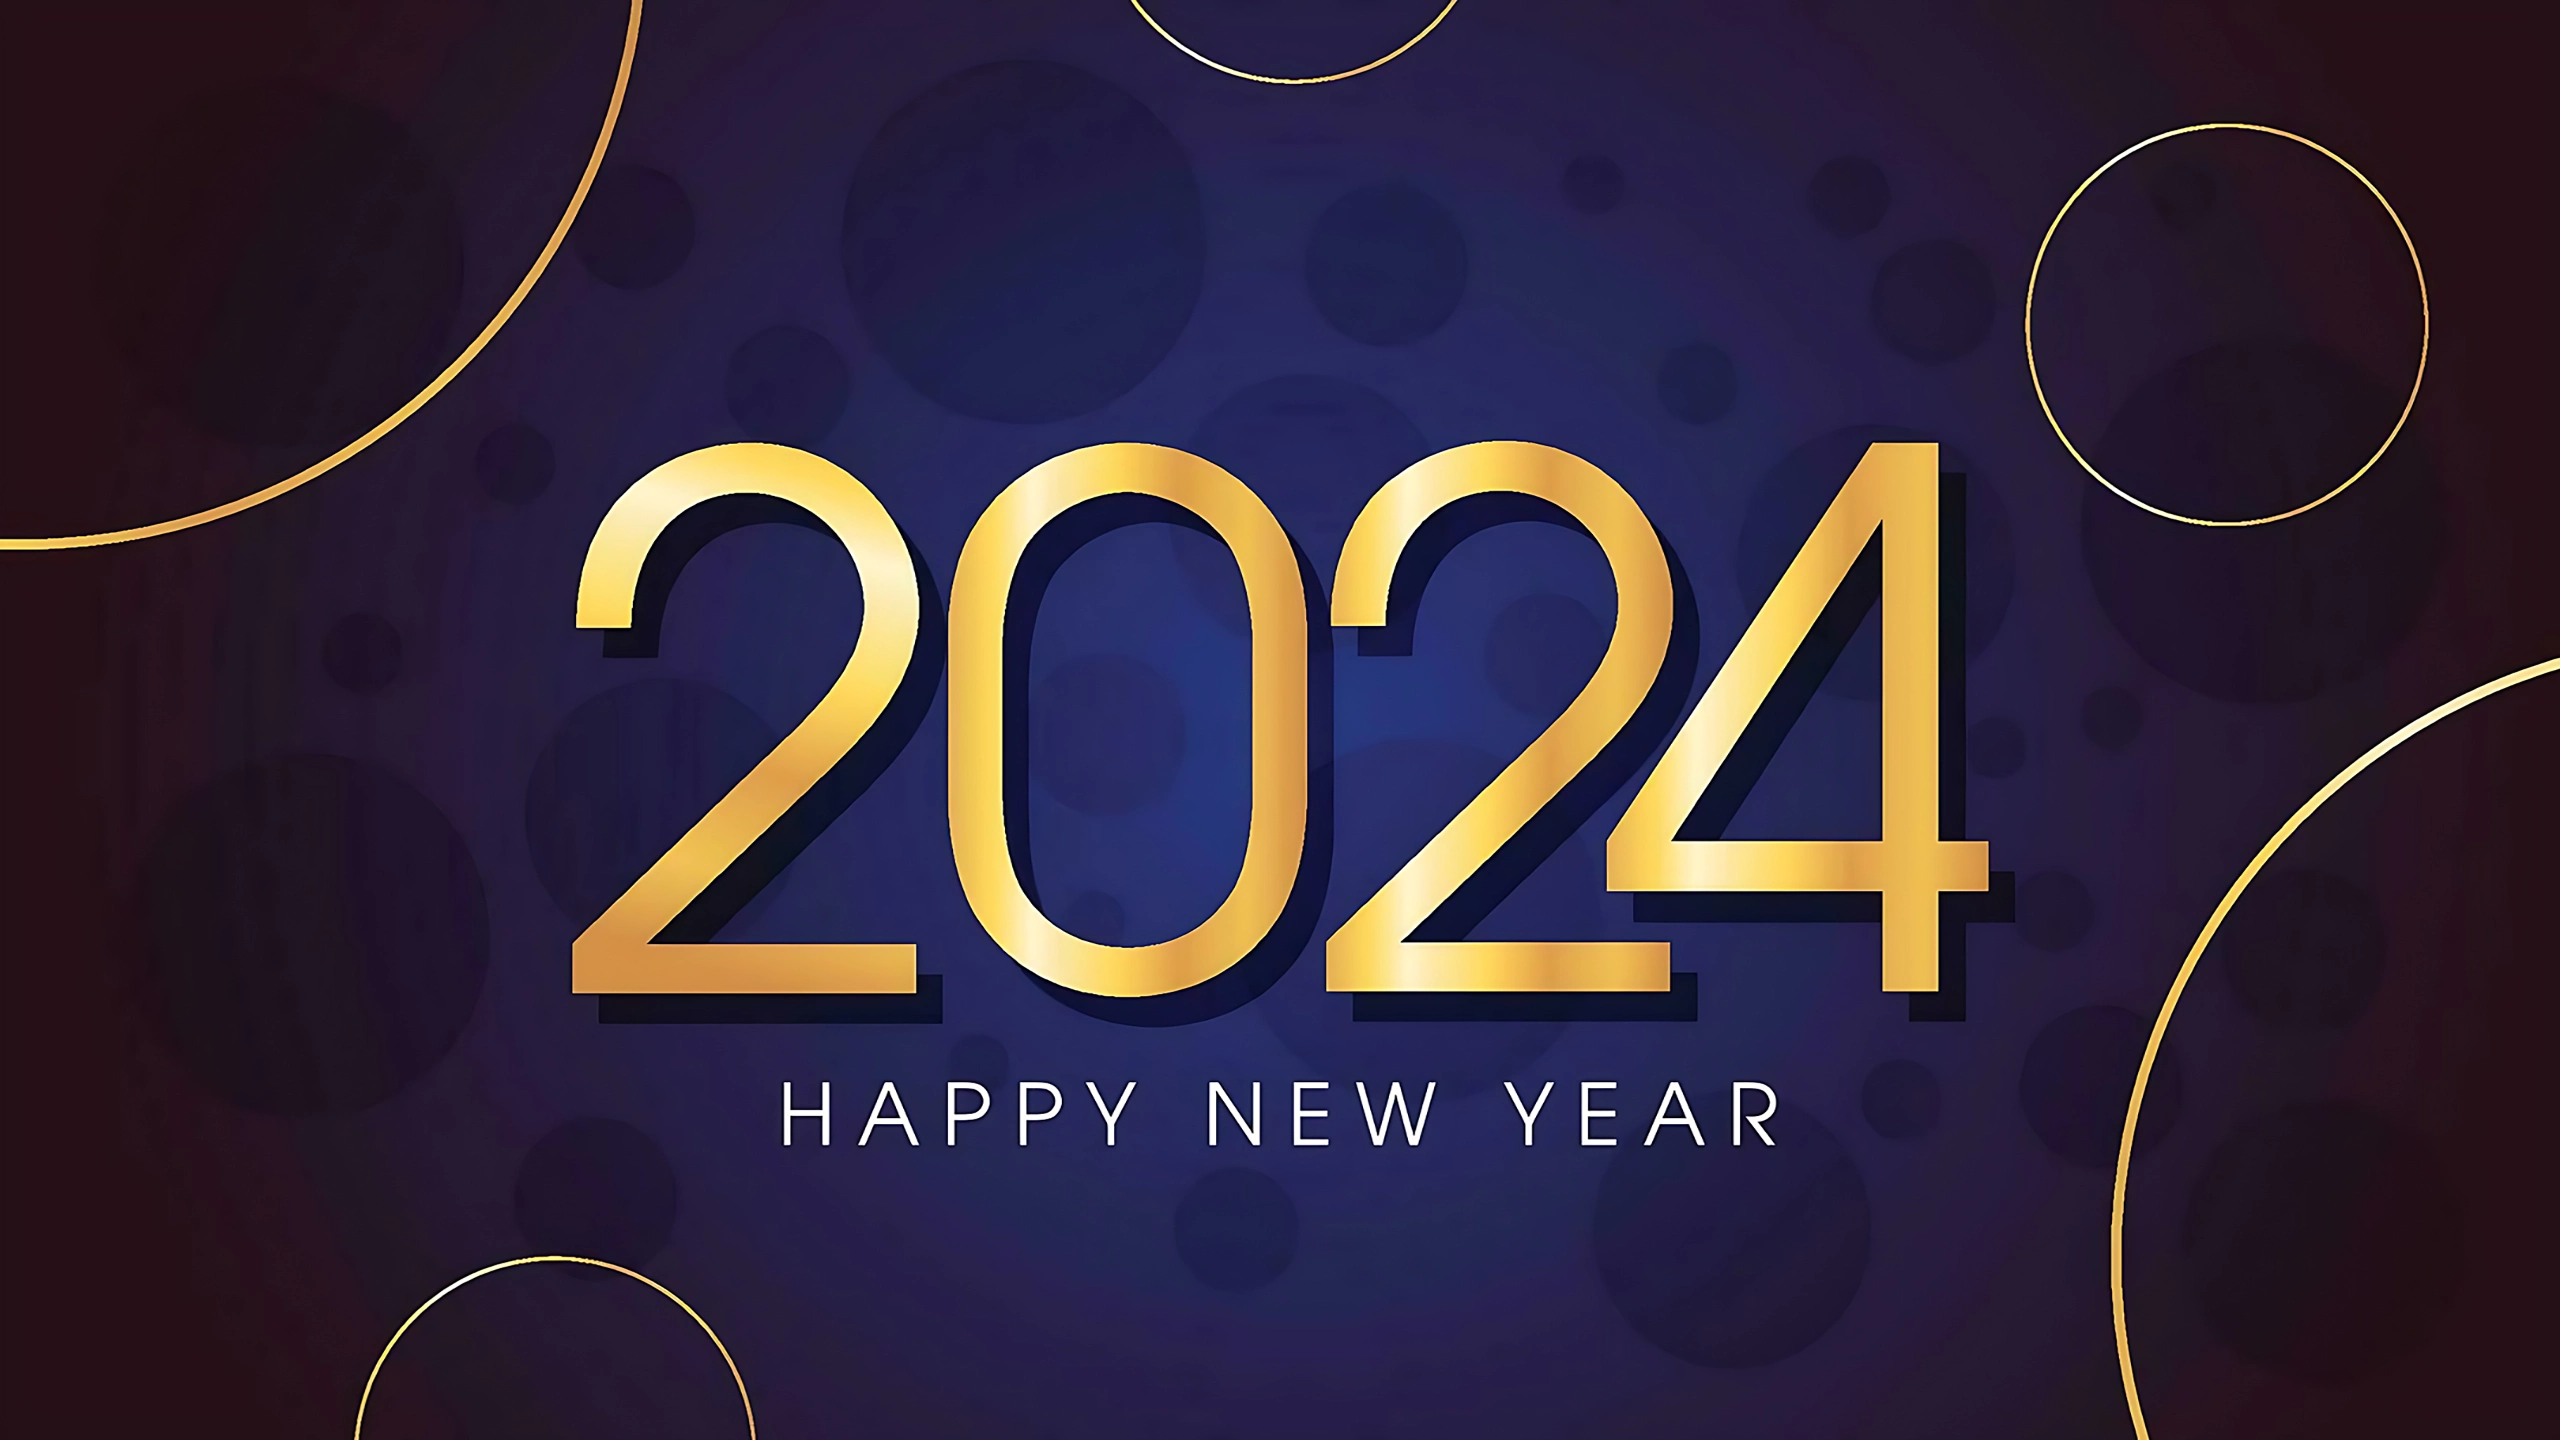 golden letter and blue purple happy new year 2024 background 2650x1440 wallpaper